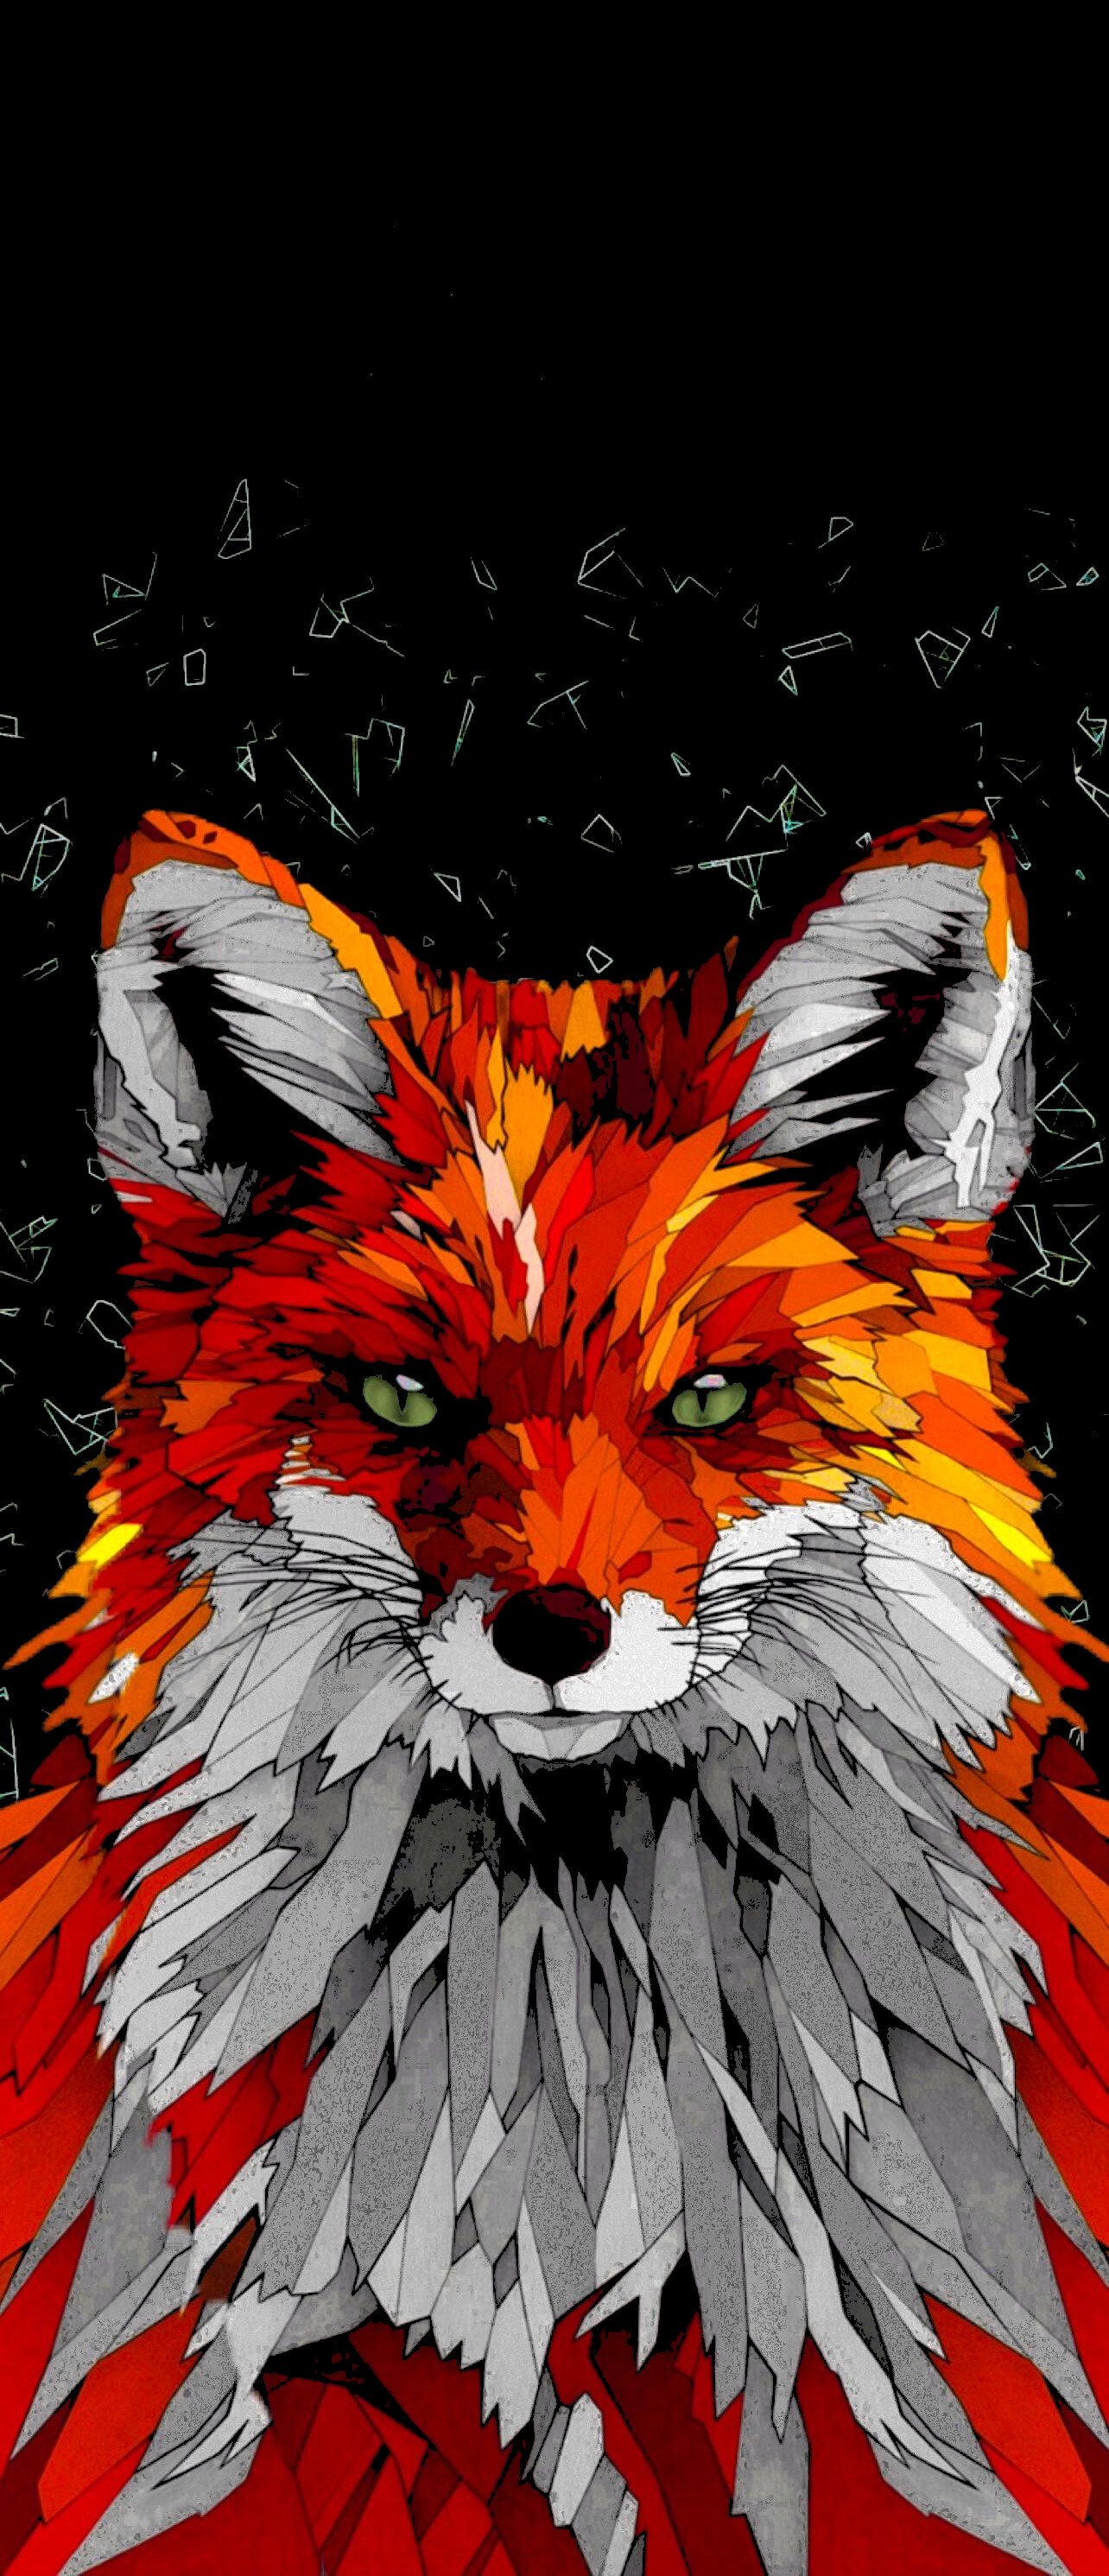 Geometric Animal: The use of one or more straight lines designed to create a visual sensory impression, Fox. 1290x2990 HD Background.